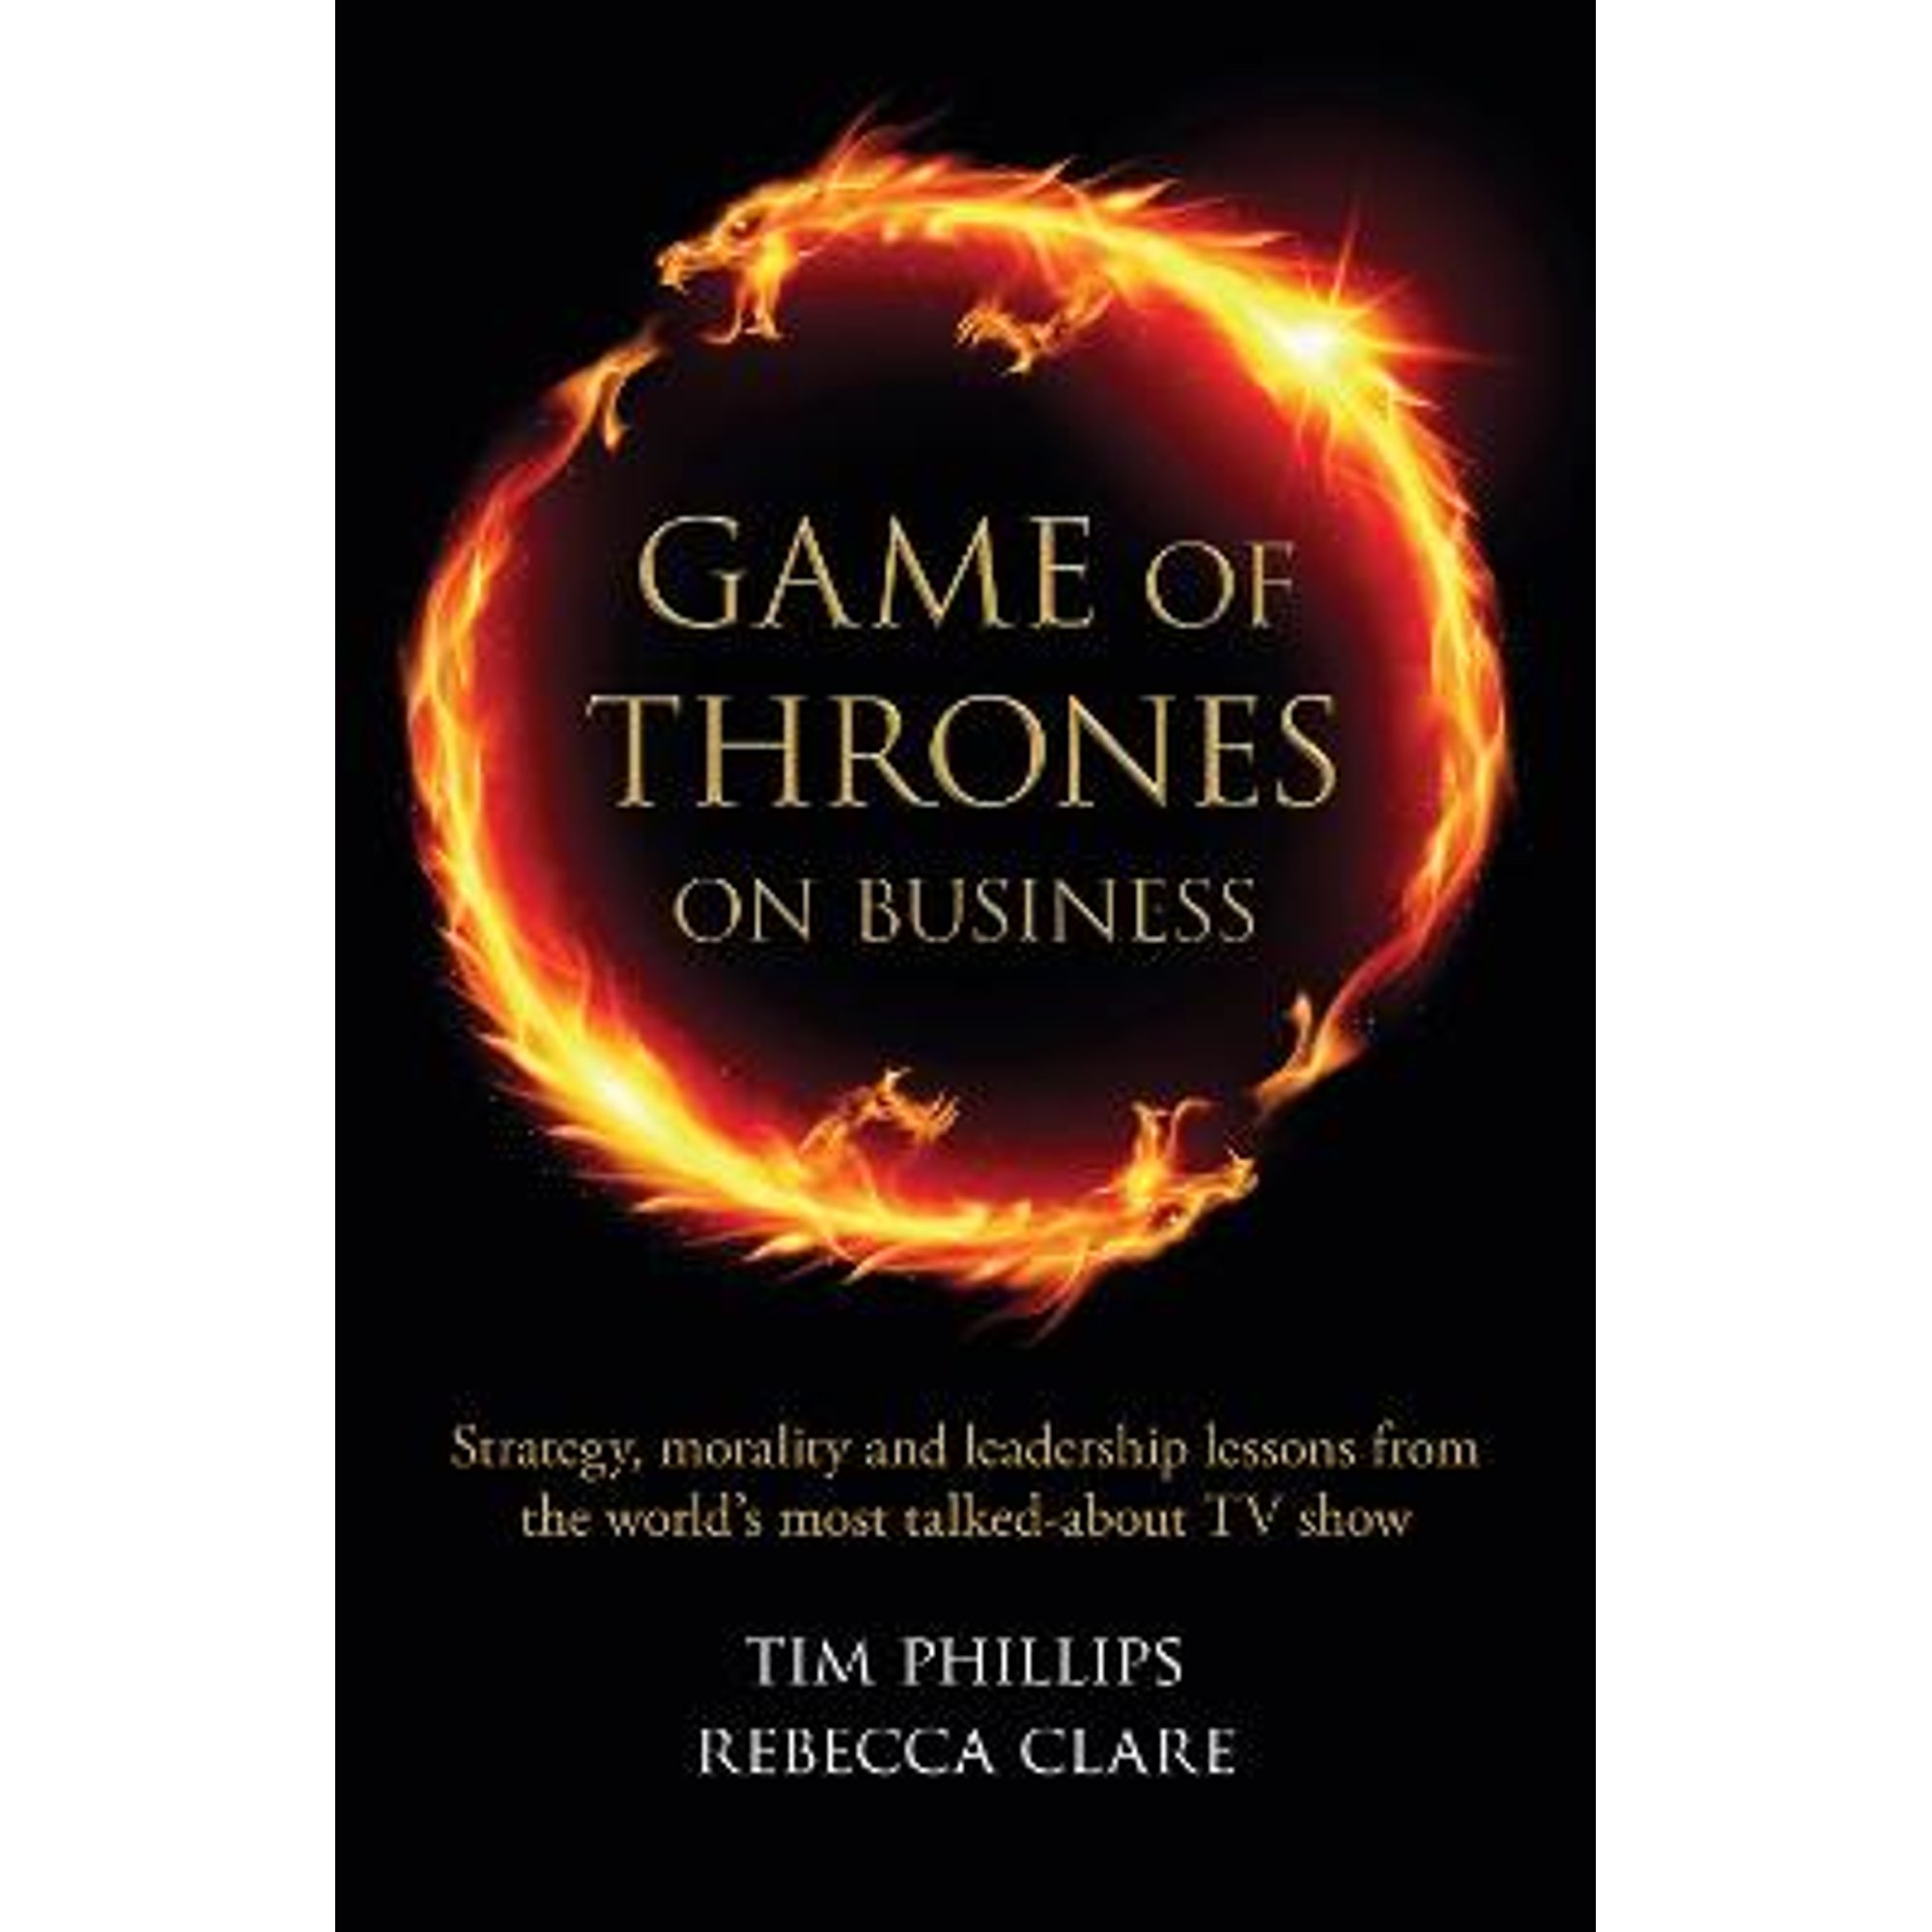 Pre-Owned Game of Thrones on Business: Strategy, morality and leadership lessons from the world's (Paperback 9781908984388) by Rebecca Clare, Tim Phillips - image 1 of 1